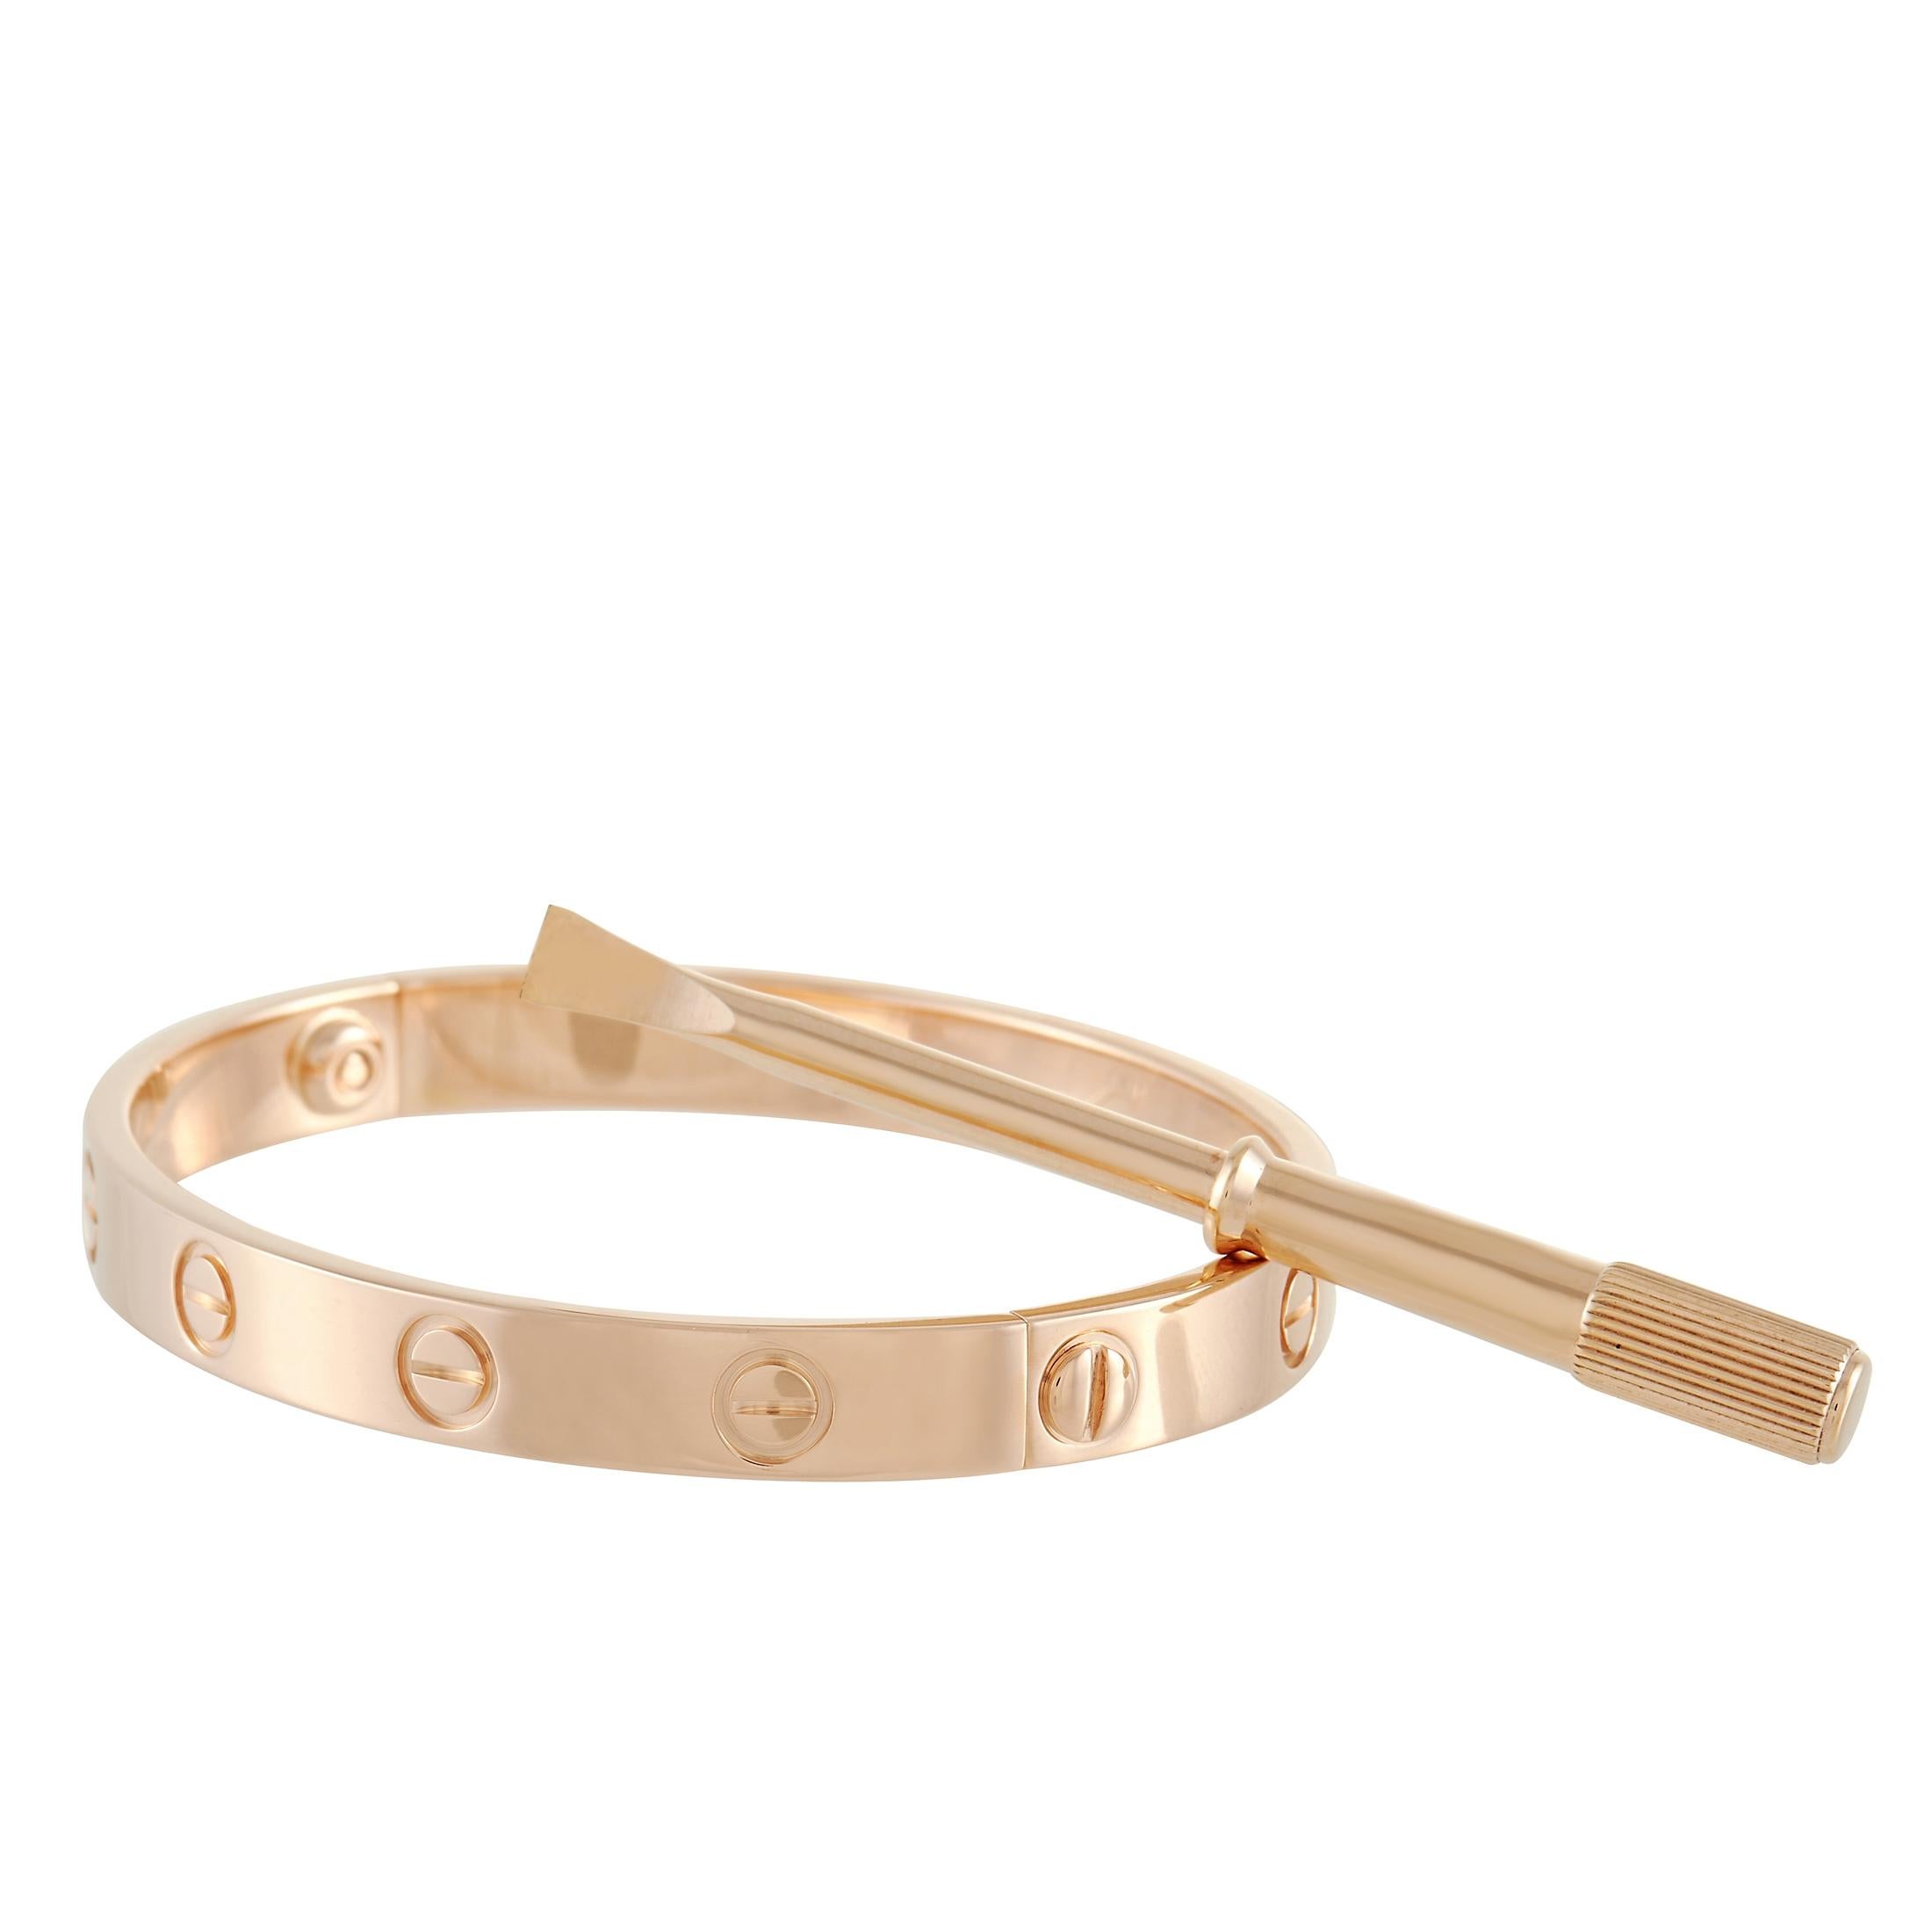 There is perhaps no piece of jewelry more breathtaking than this bracelet from Cartier’s love collection. Crafted from 18K Rose Gold, this estate piece includes iconic screw accents as well as the original screwdriver. This size 16 piece measures